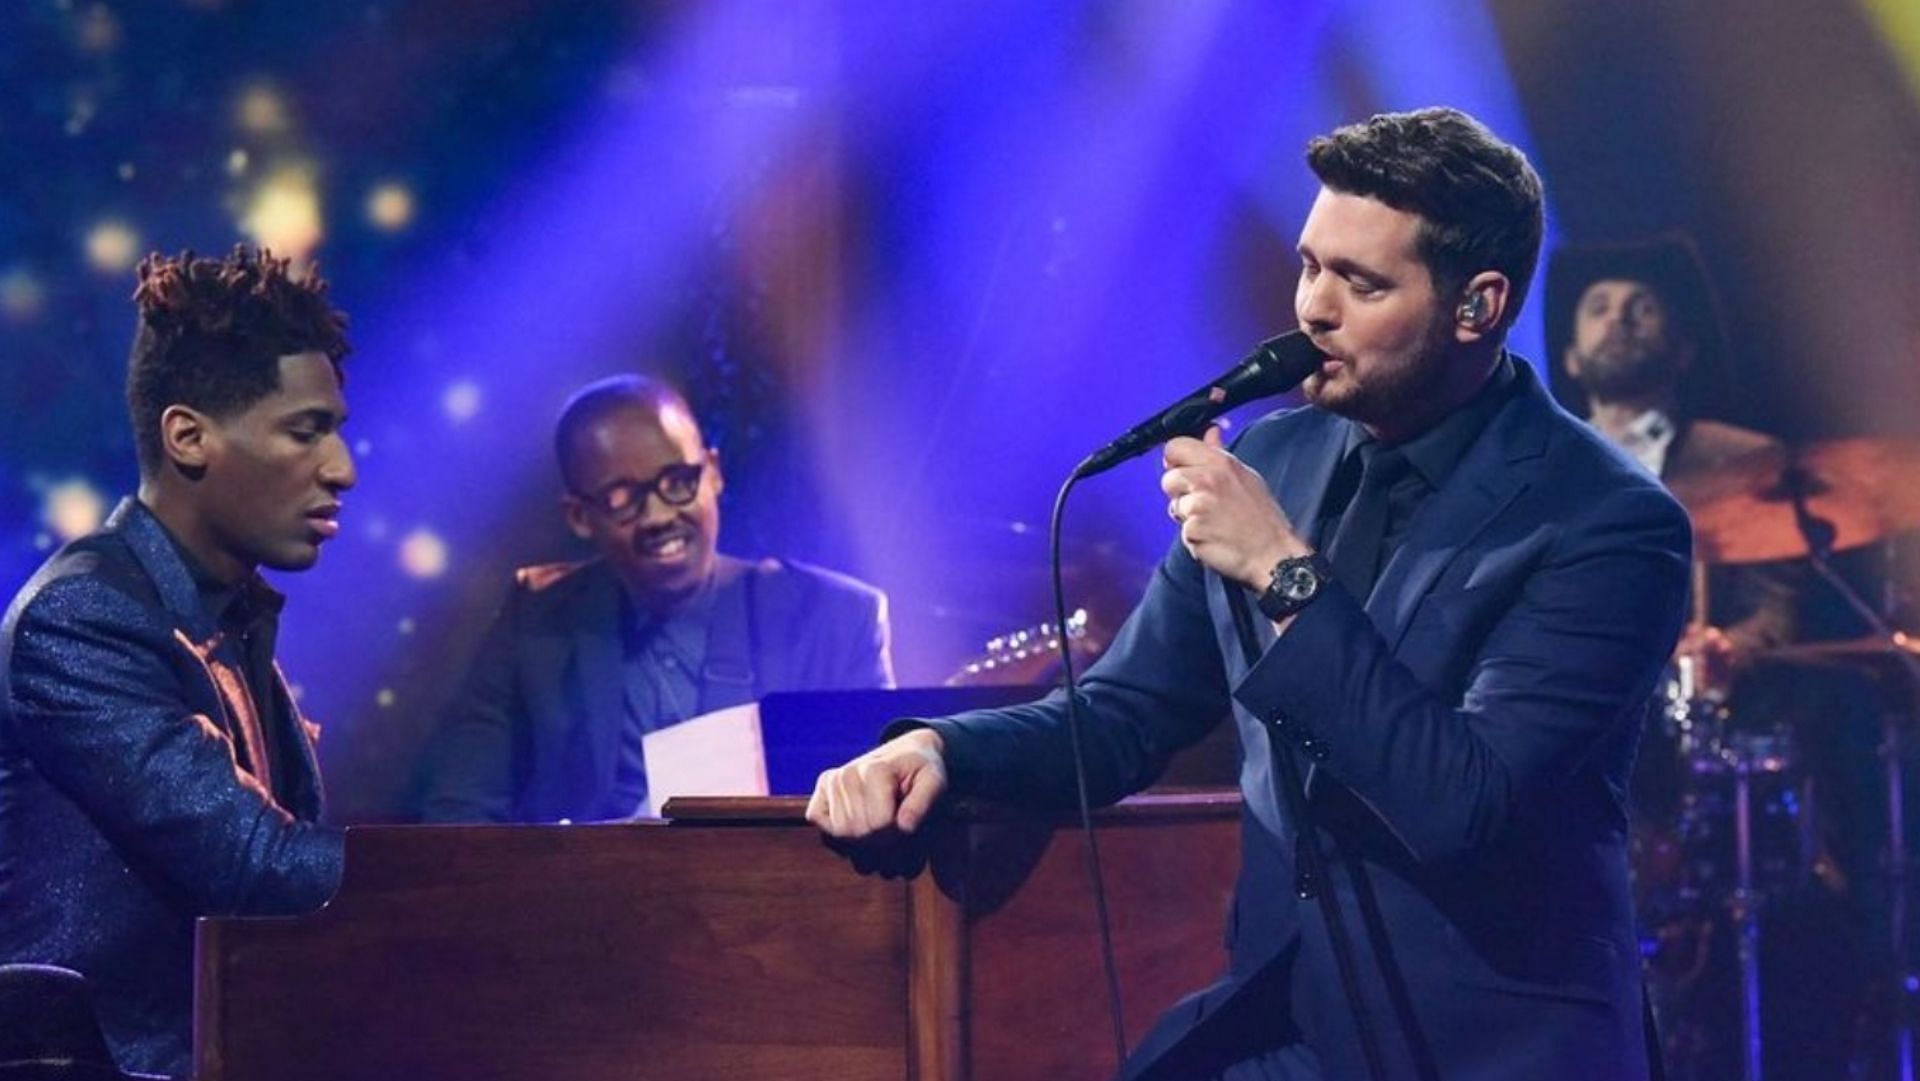 Michael Buble has announced a UK tour for 2023. (Image via Getty)